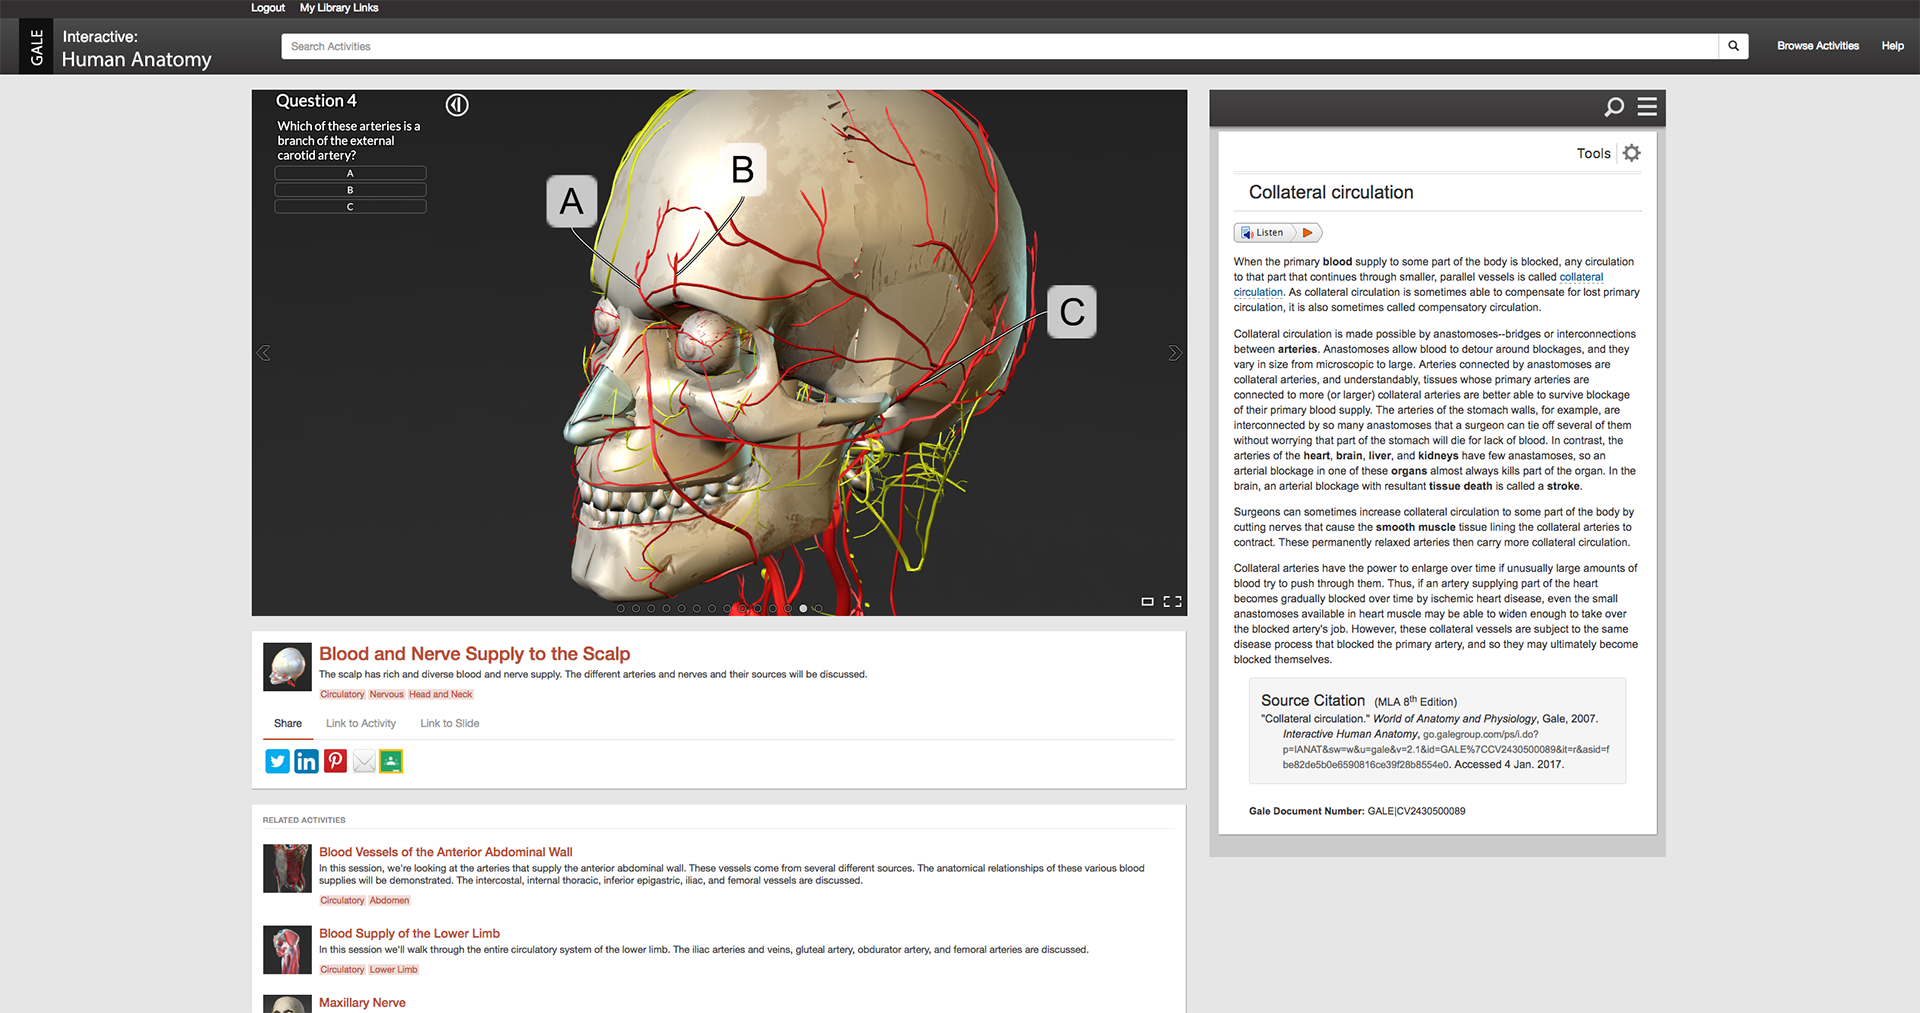 Self-assessment tool in Gale Interactive: Human Anatomy.